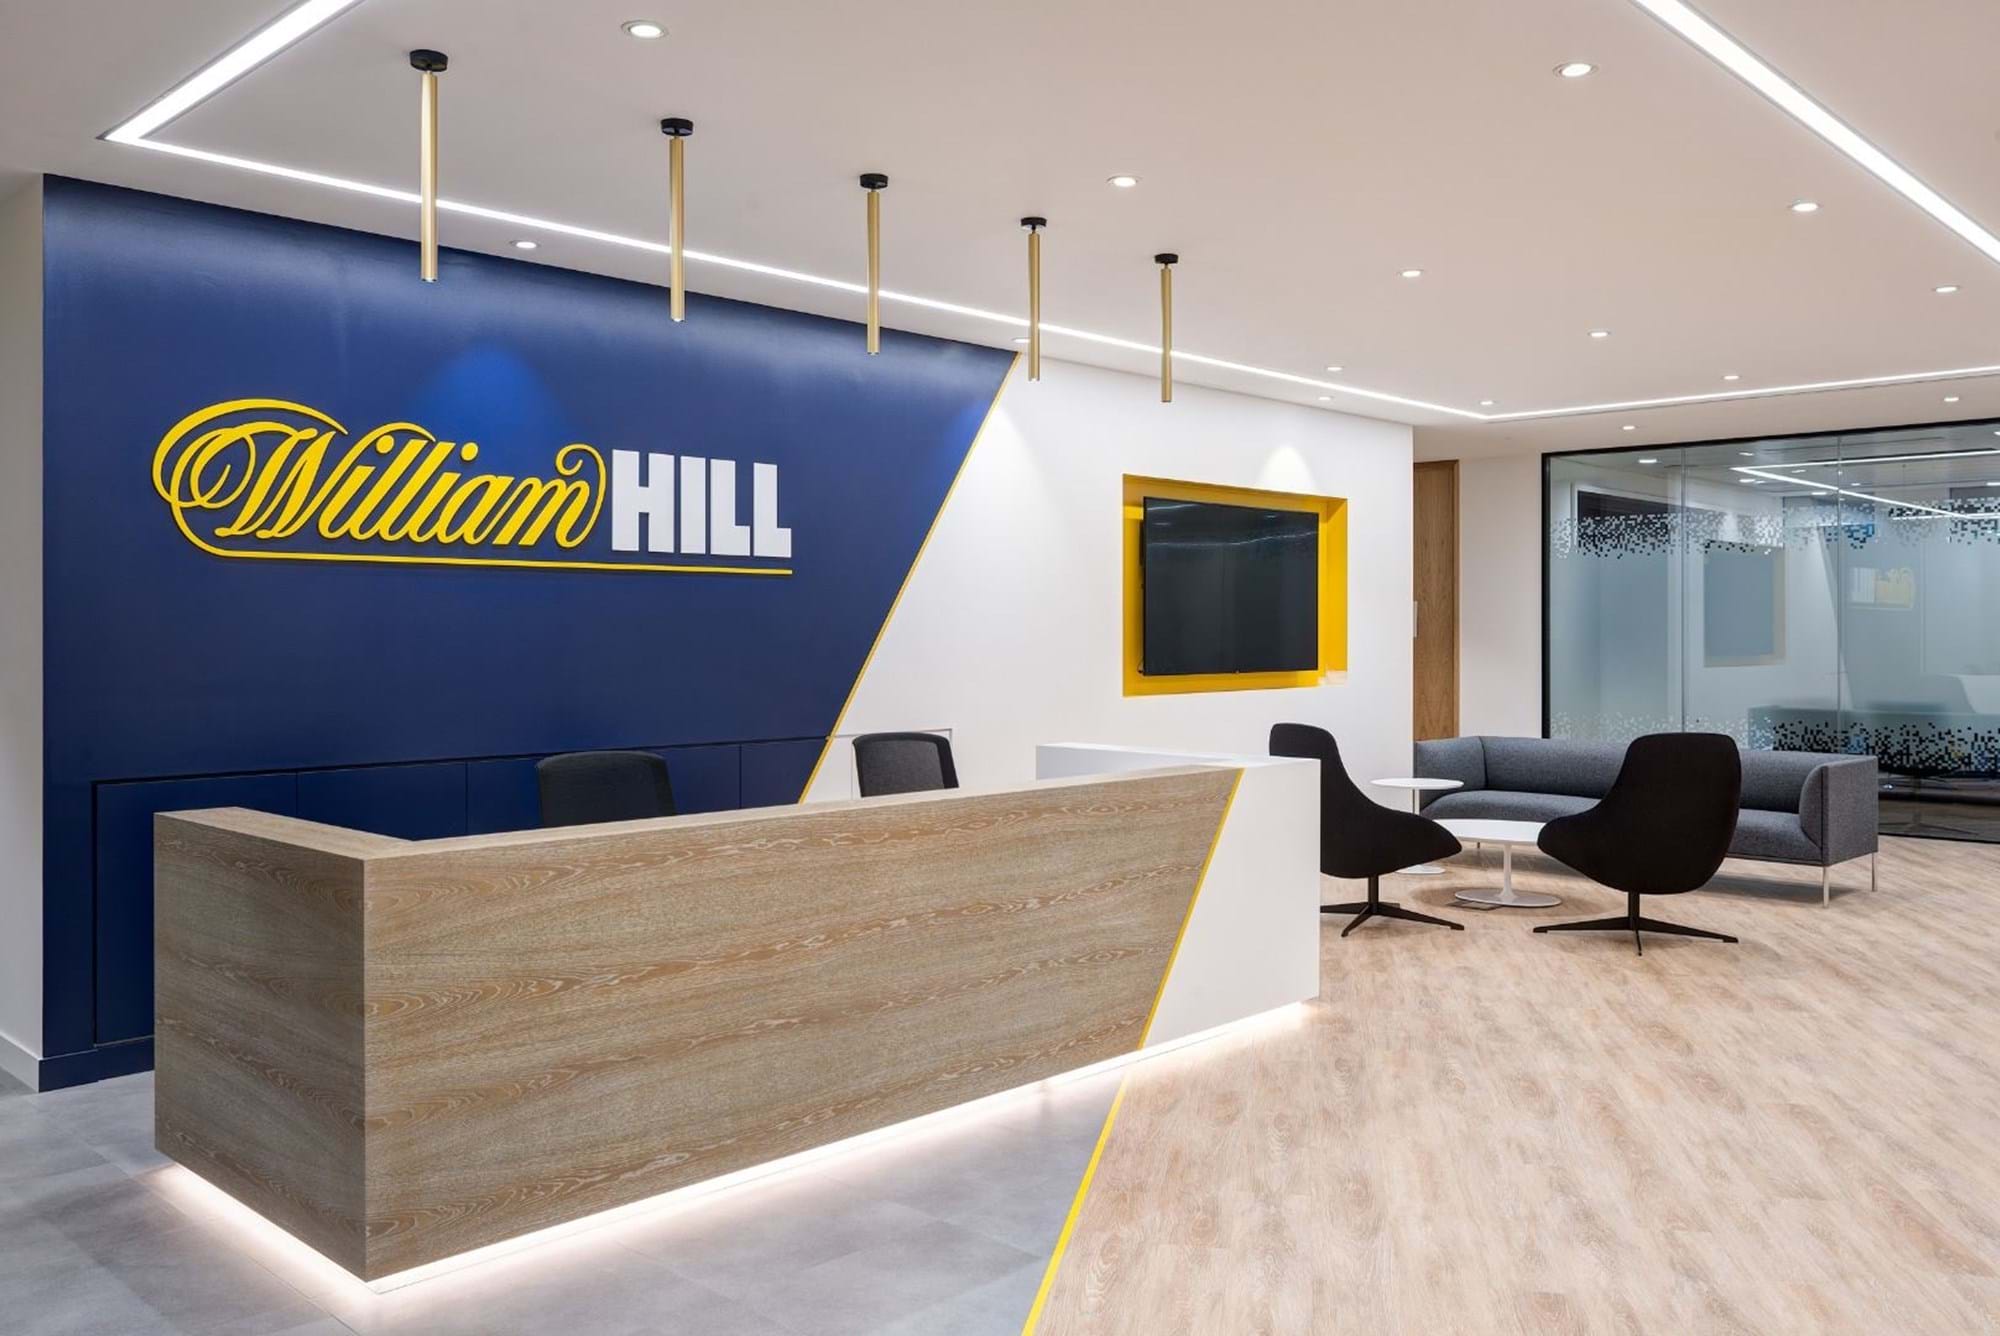 Modus Workspace office design, fit out and refurbishment - William Hill - William Hill 01 highres sRGB.jpg